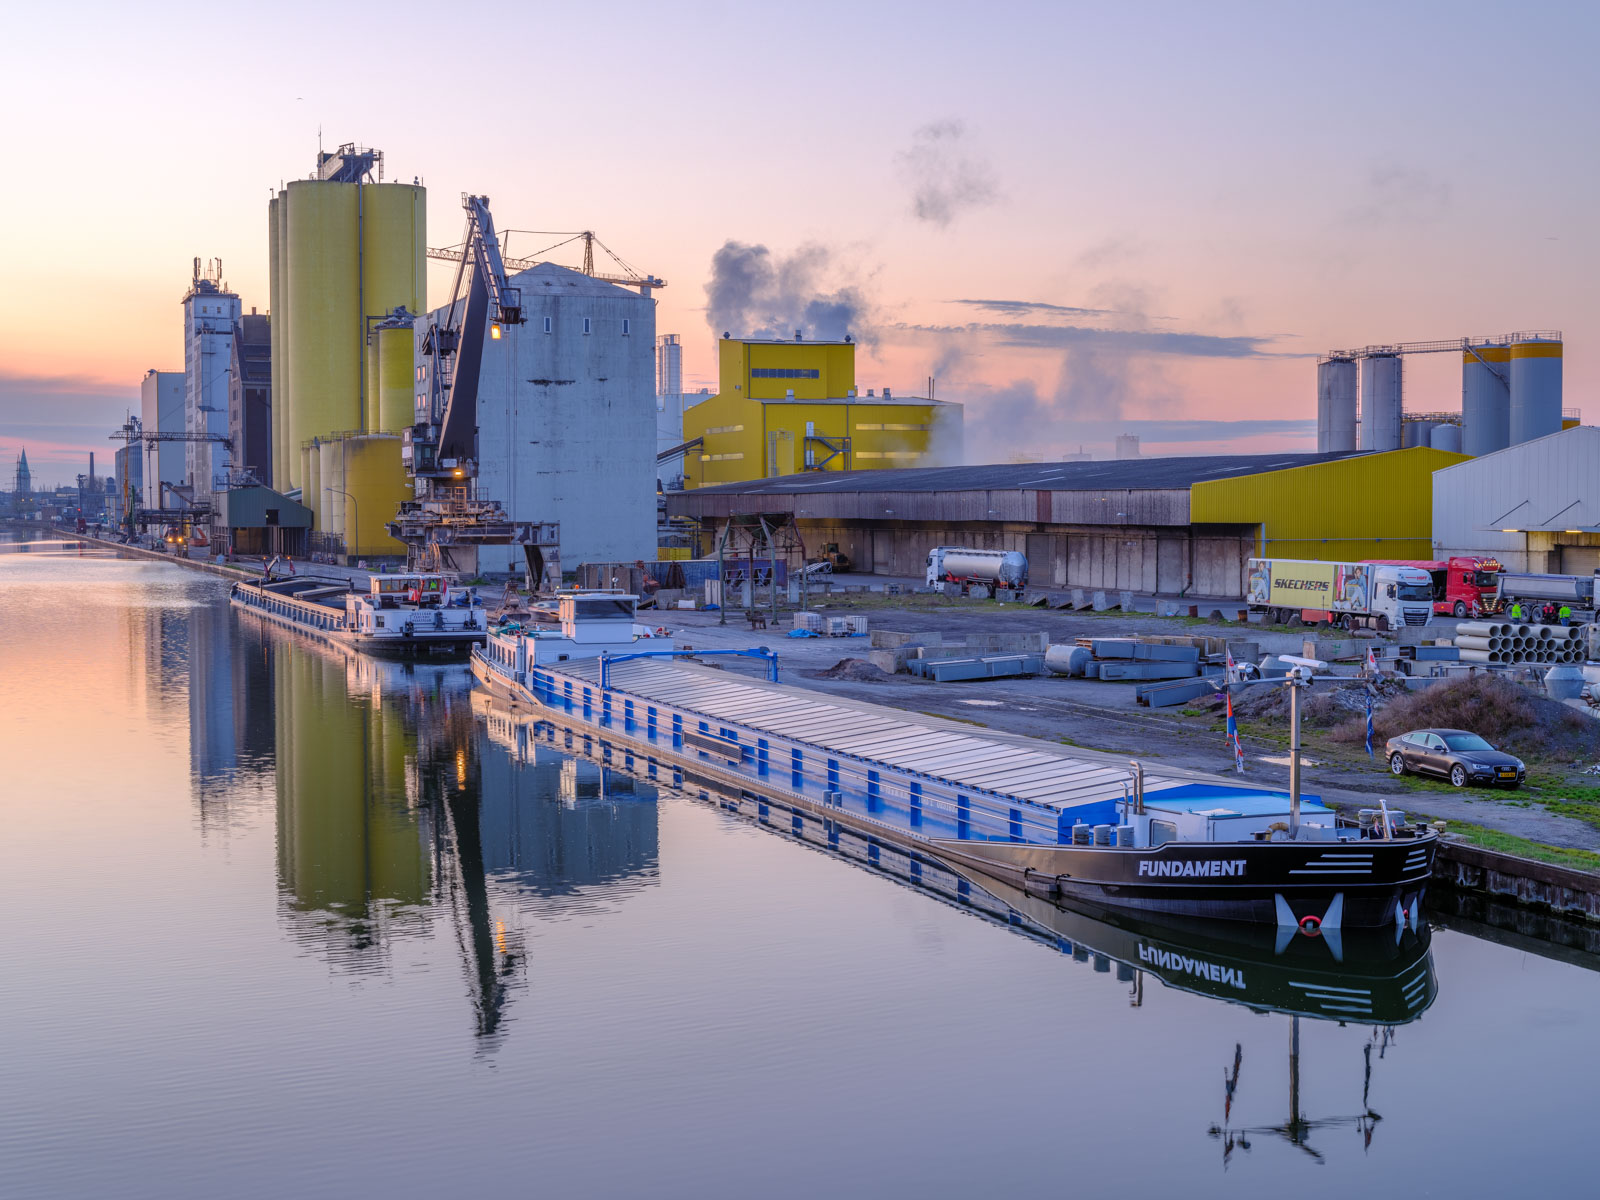 North harbour and oil mill on the Datteln-Hamm Canal in April 2021 (Hamm, Germany).